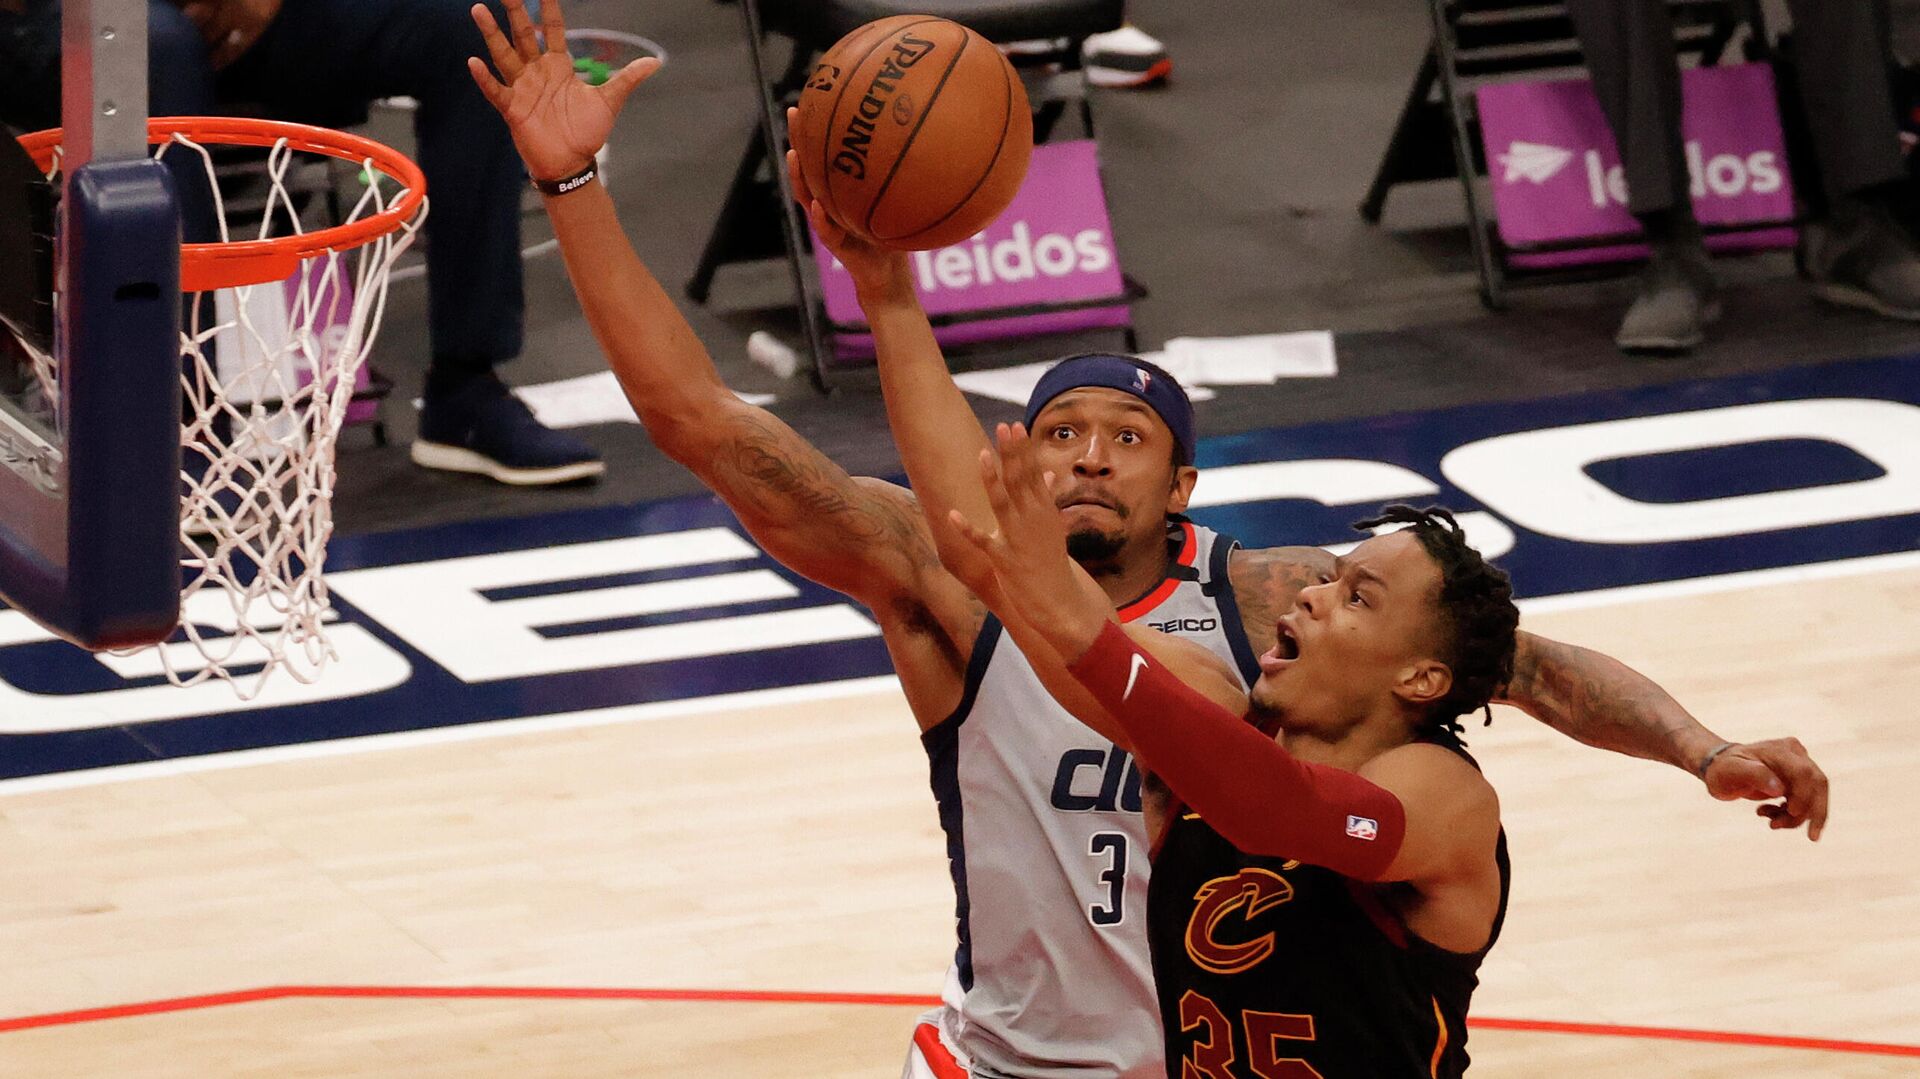 Apr 25, 2021; Washington, District of Columbia, USA; Washington Wizards guard Bradley Beal (3) prepares to block a shot by Cleveland Cavaliers forward Isaac Okoro (35) in the fourth quarter at Capital One Arena. Mandatory Credit: Geoff Burke-USA TODAY Sports - РИА Новости, 1920, 26.04.2021